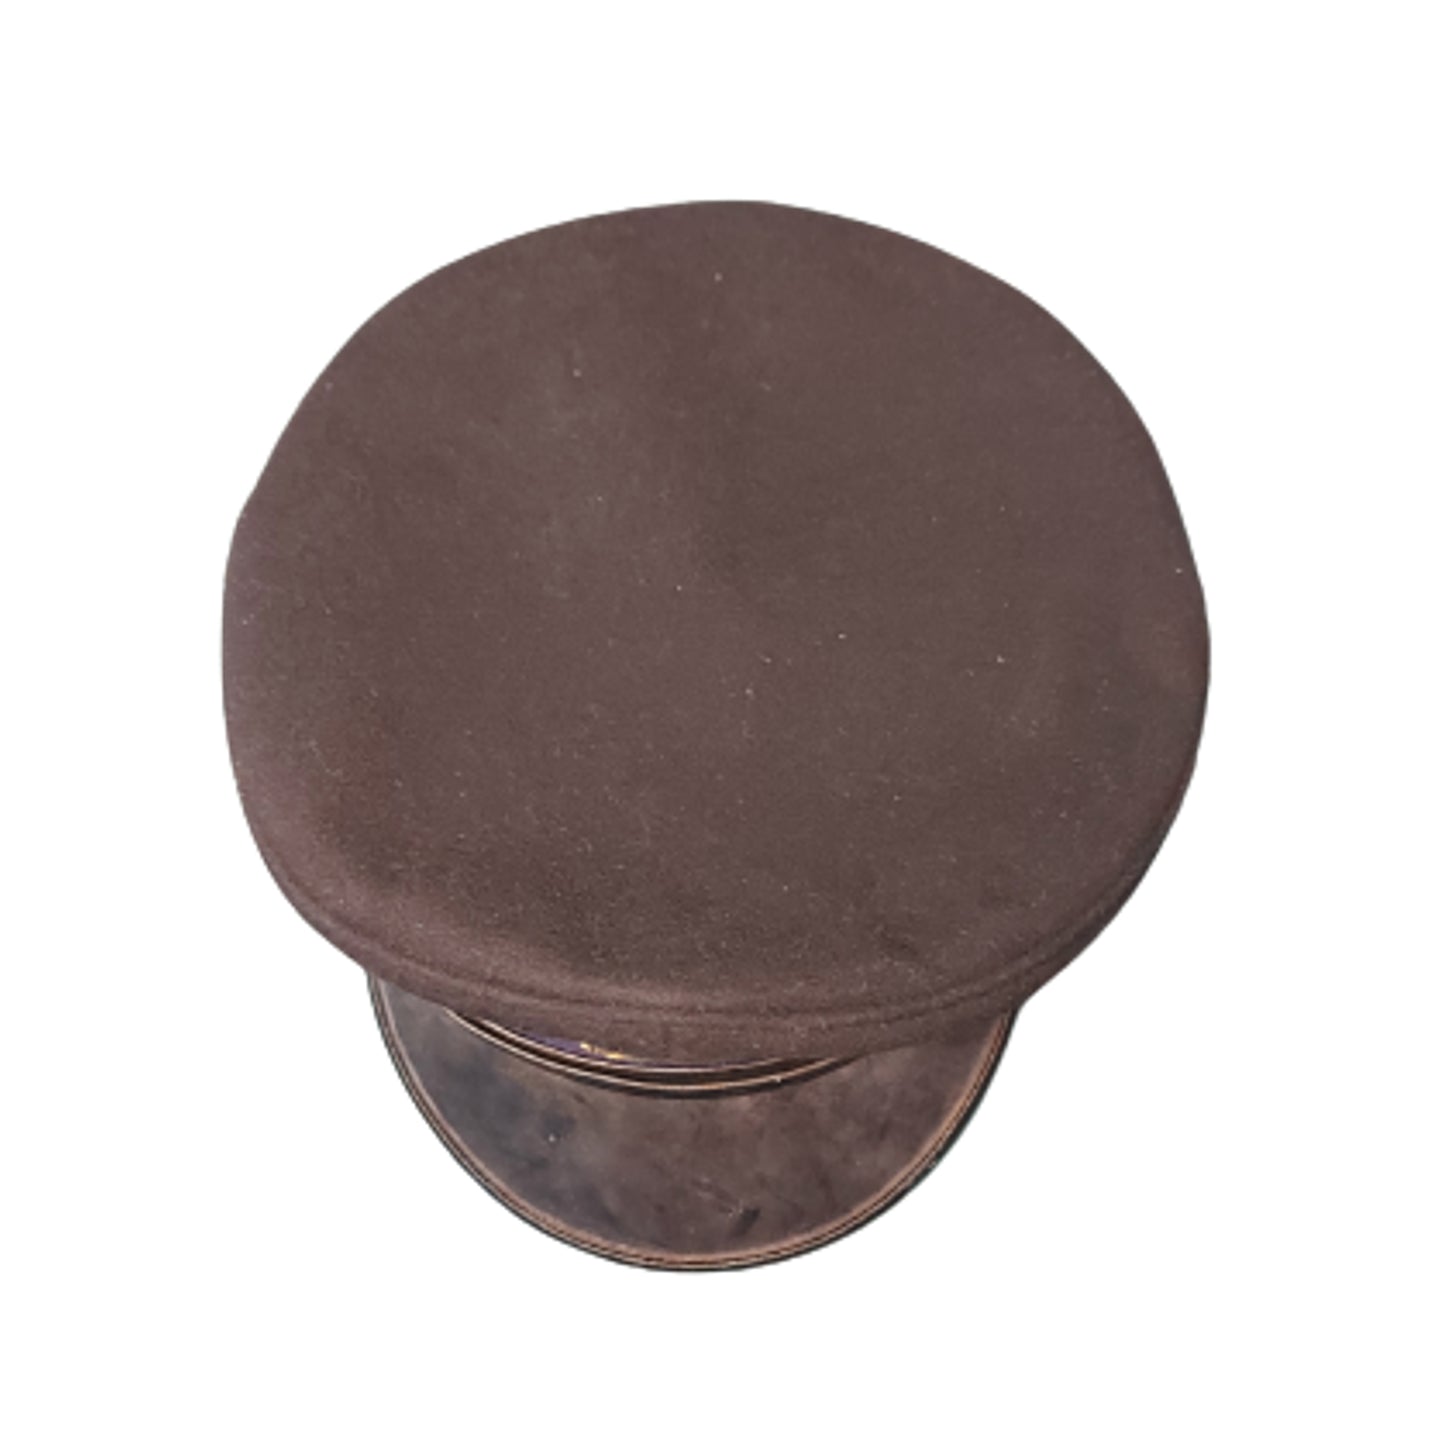 WW2 RCE Royal Canadian Engineers Other Rank's Colored Forage Cap